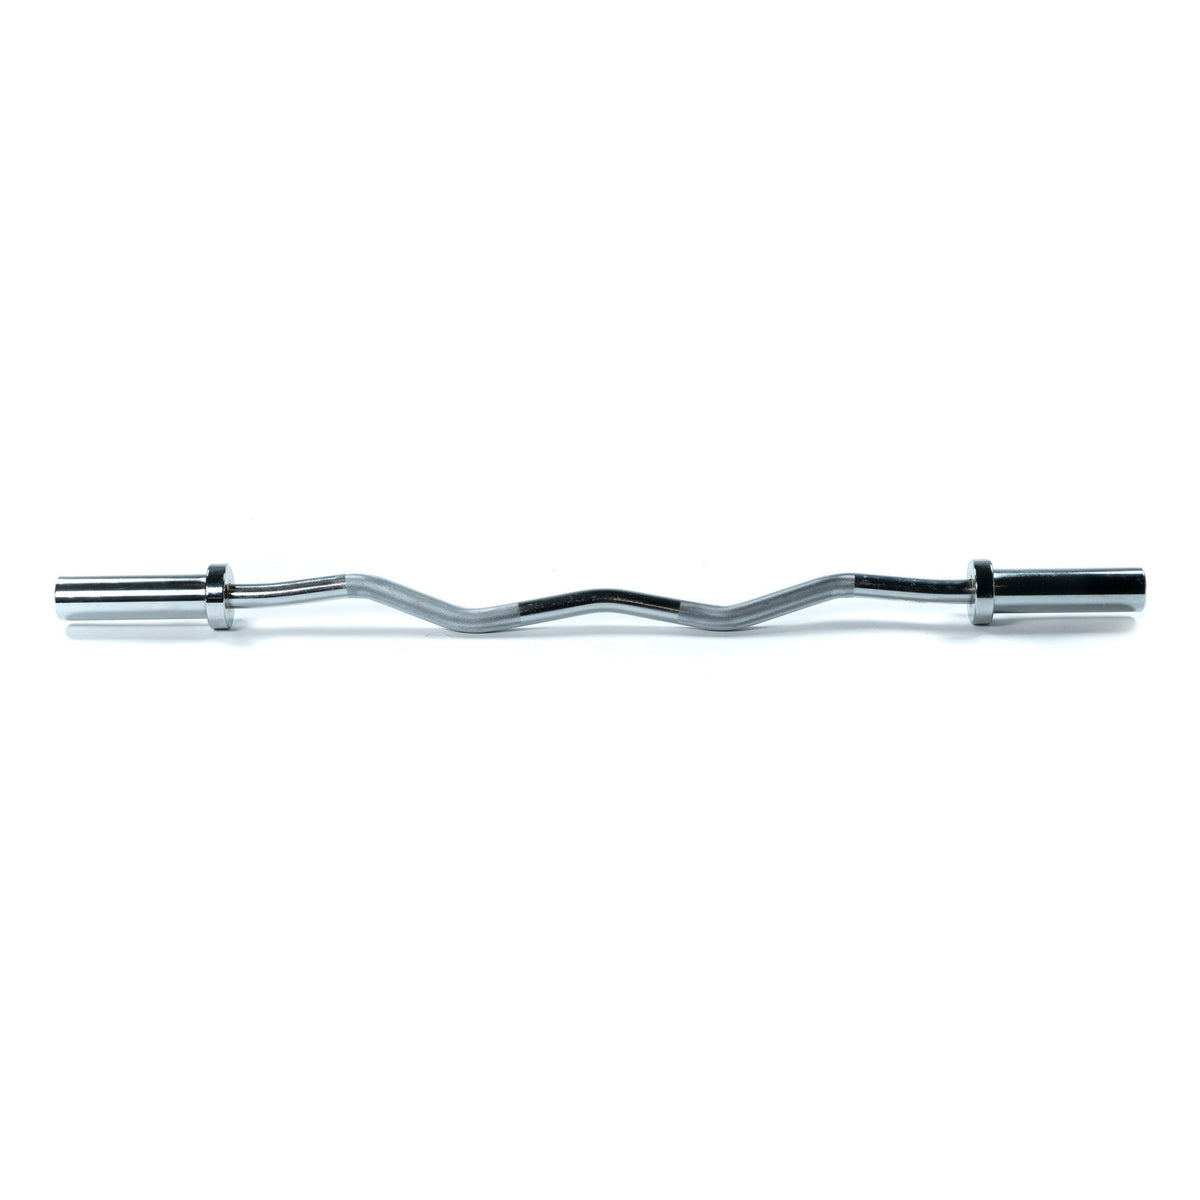 FitWay Equip. Economy Olympic EZ Curl Bar - Fitness Experience